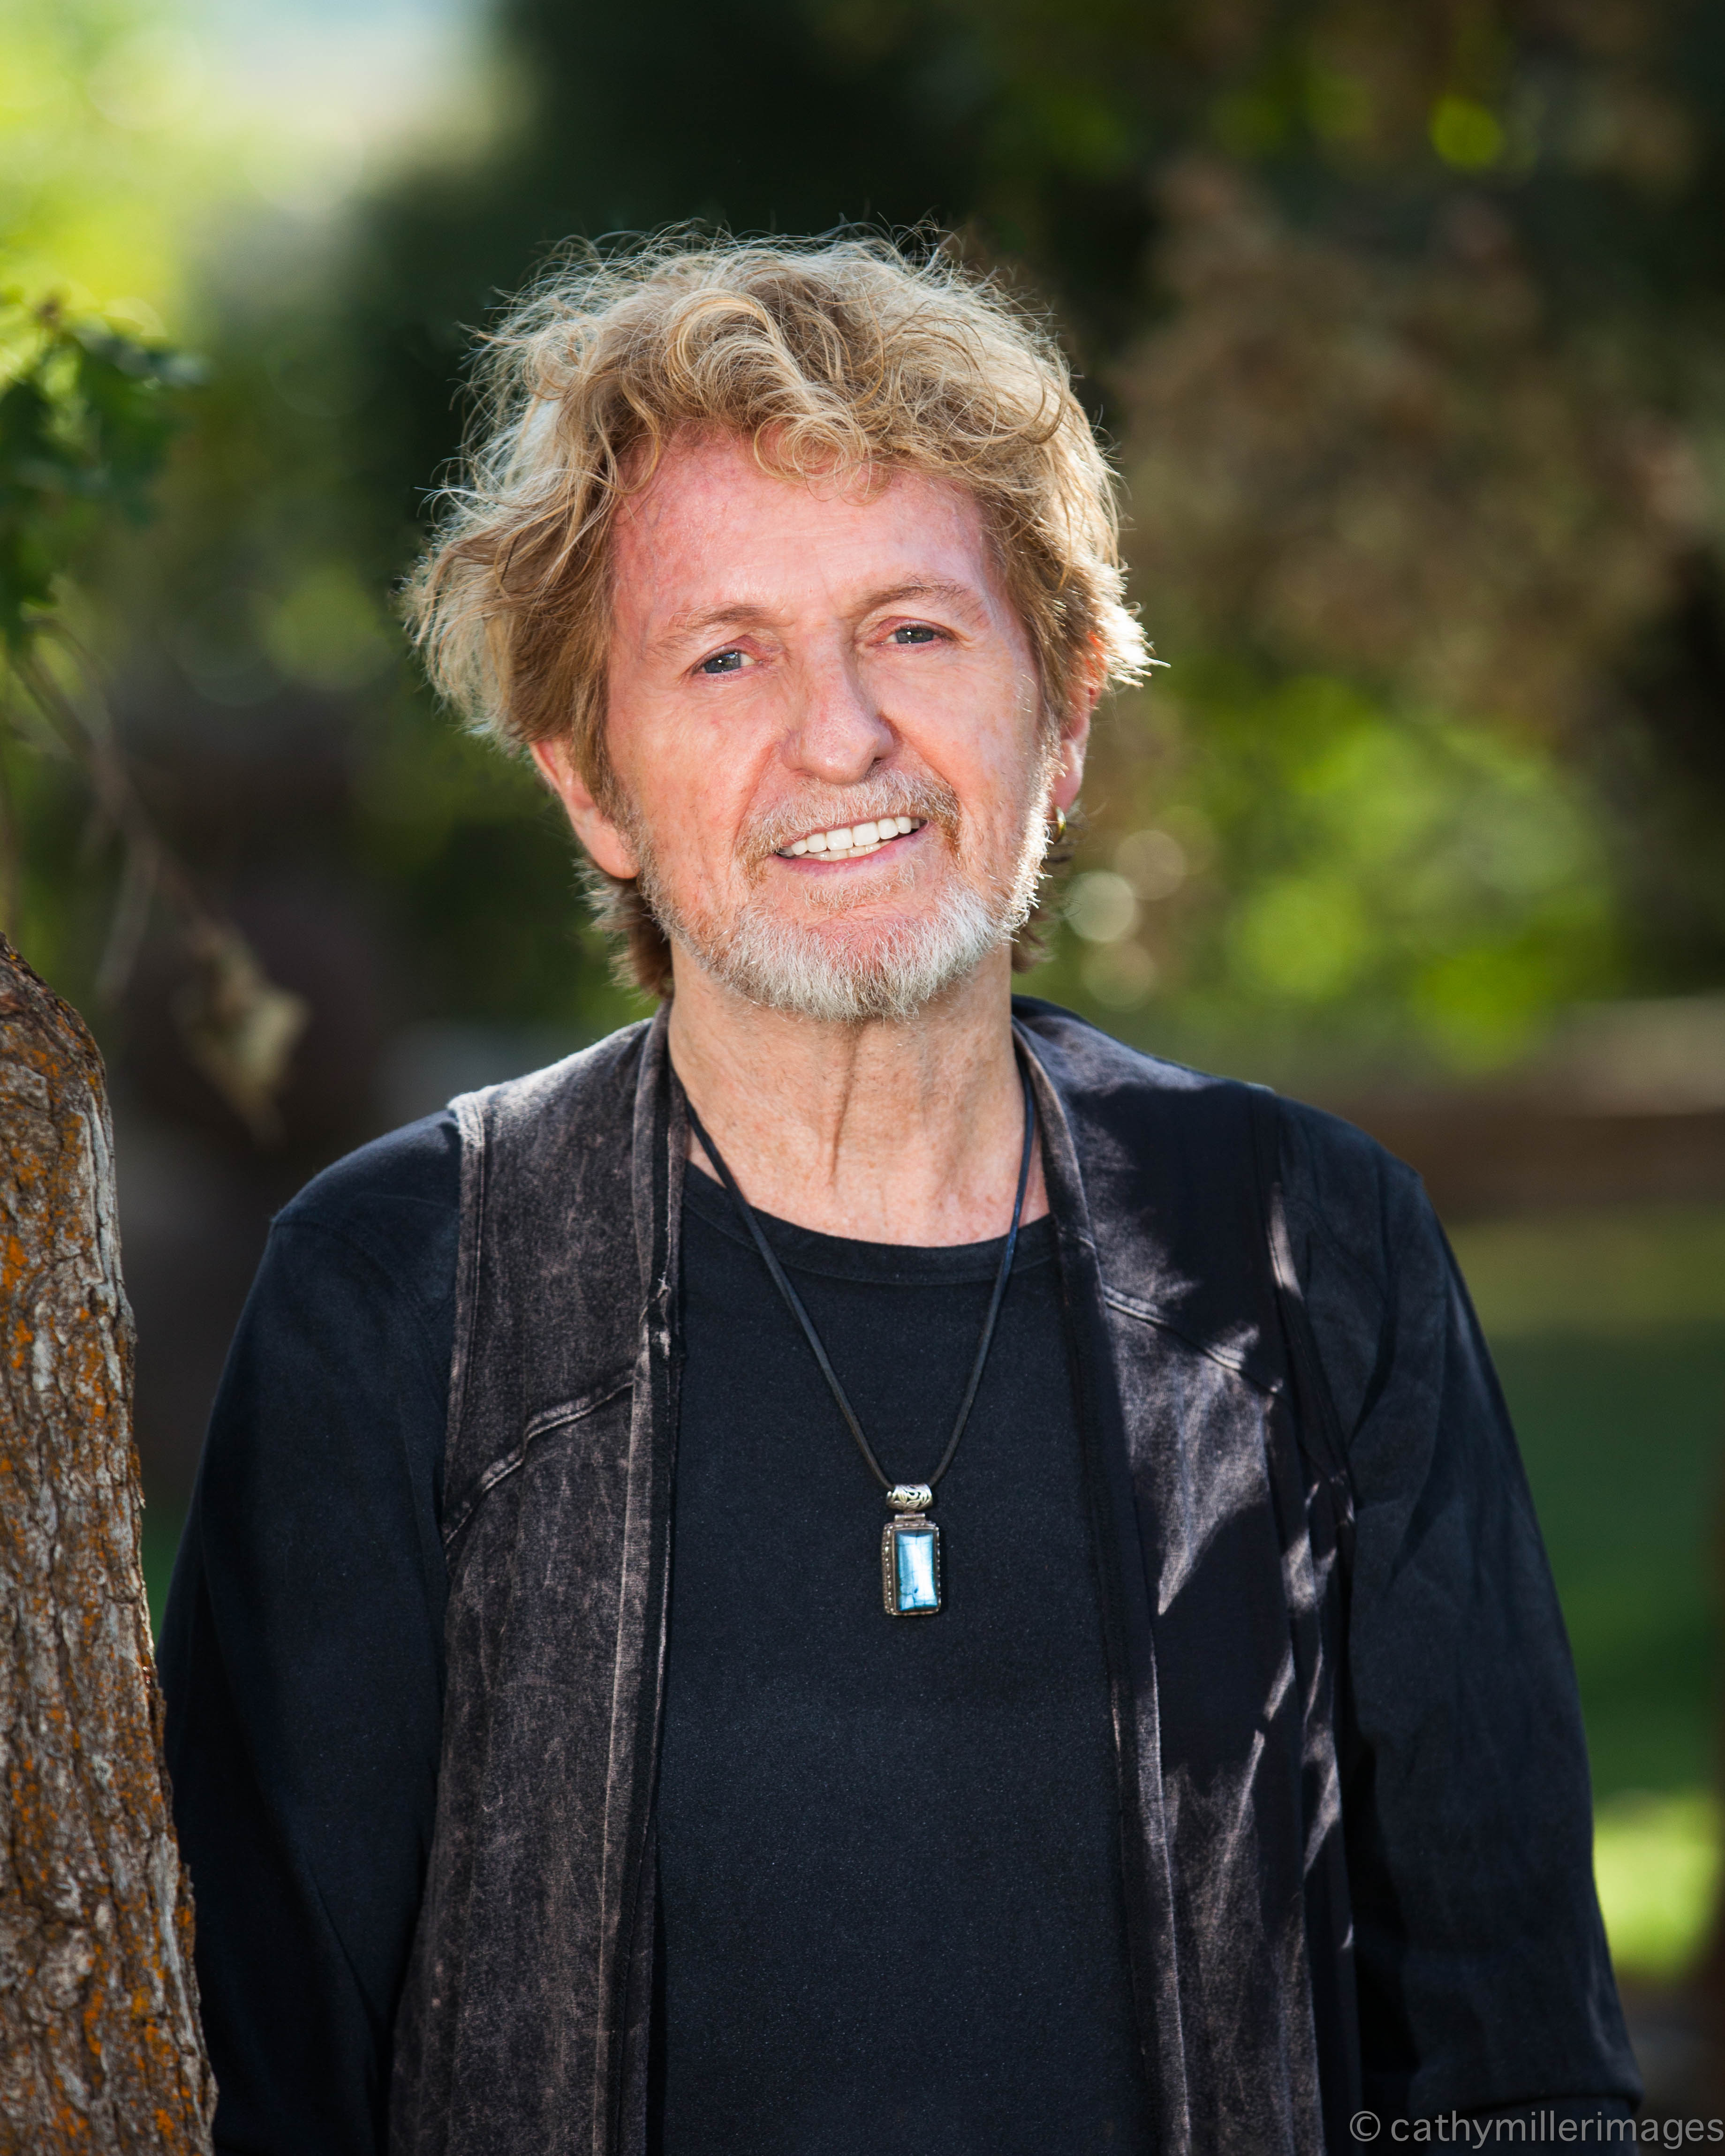 Yes, prog-rock legend Jon Anderson is headed our way with his Band of Geeks